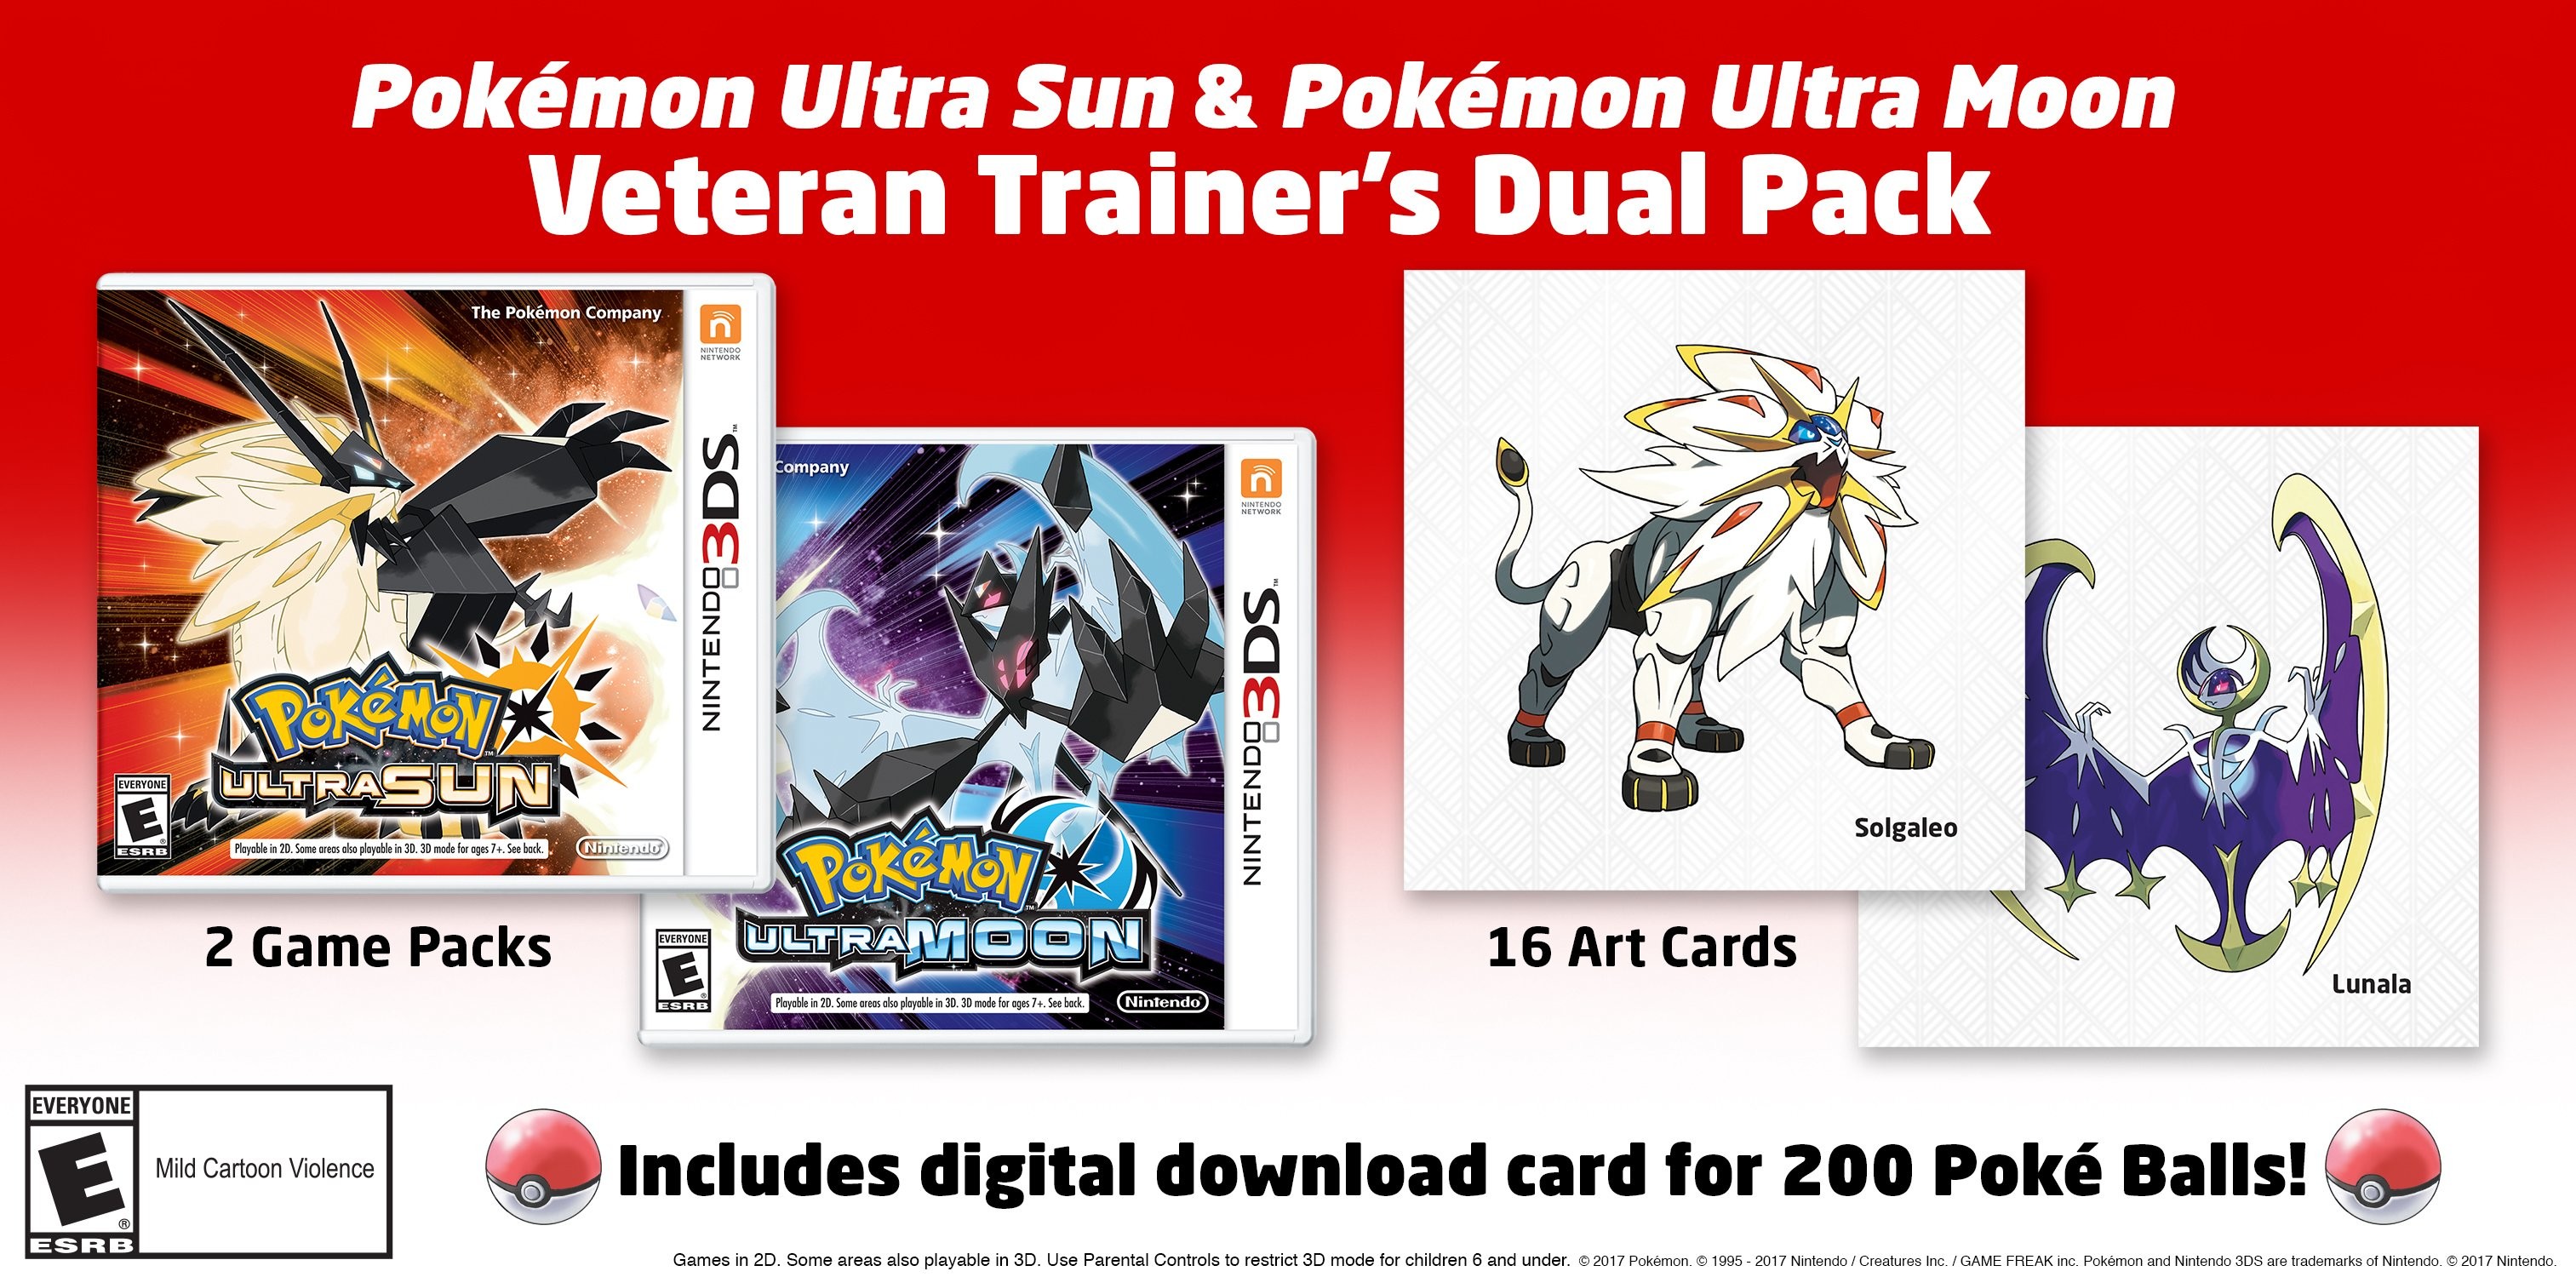 3026x1500 The list of Serial Codes for PokÃ©mon Ultra Sun and Ultra Moon has been  updated, just like the Upcoming Games page!